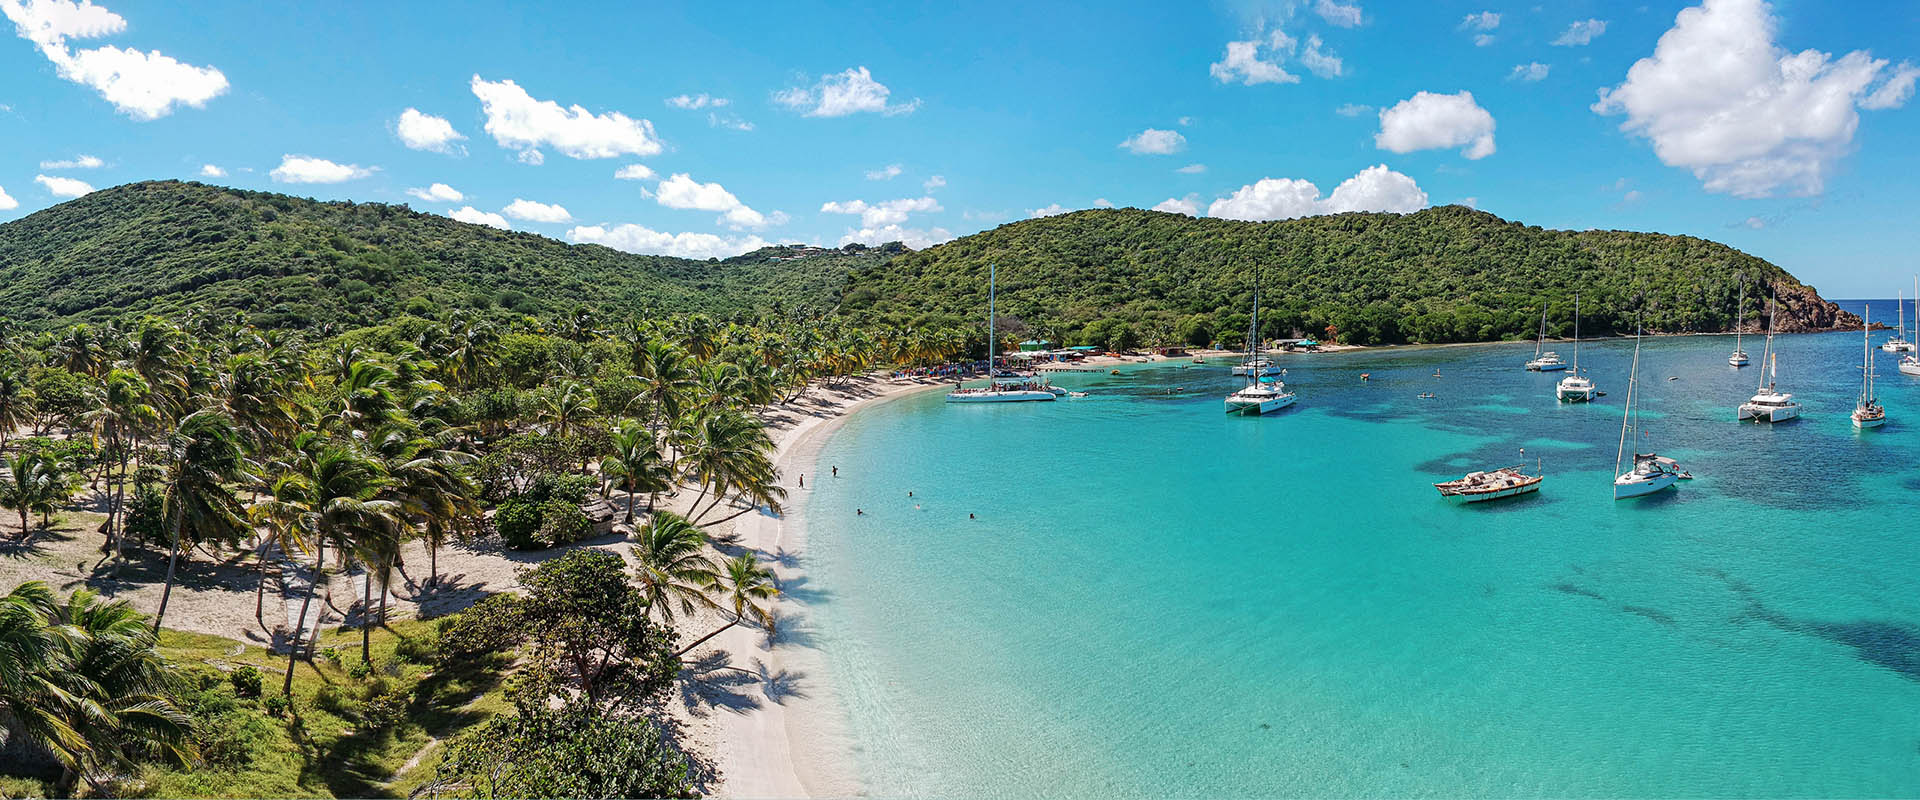 Discover the Best of the Caribbean